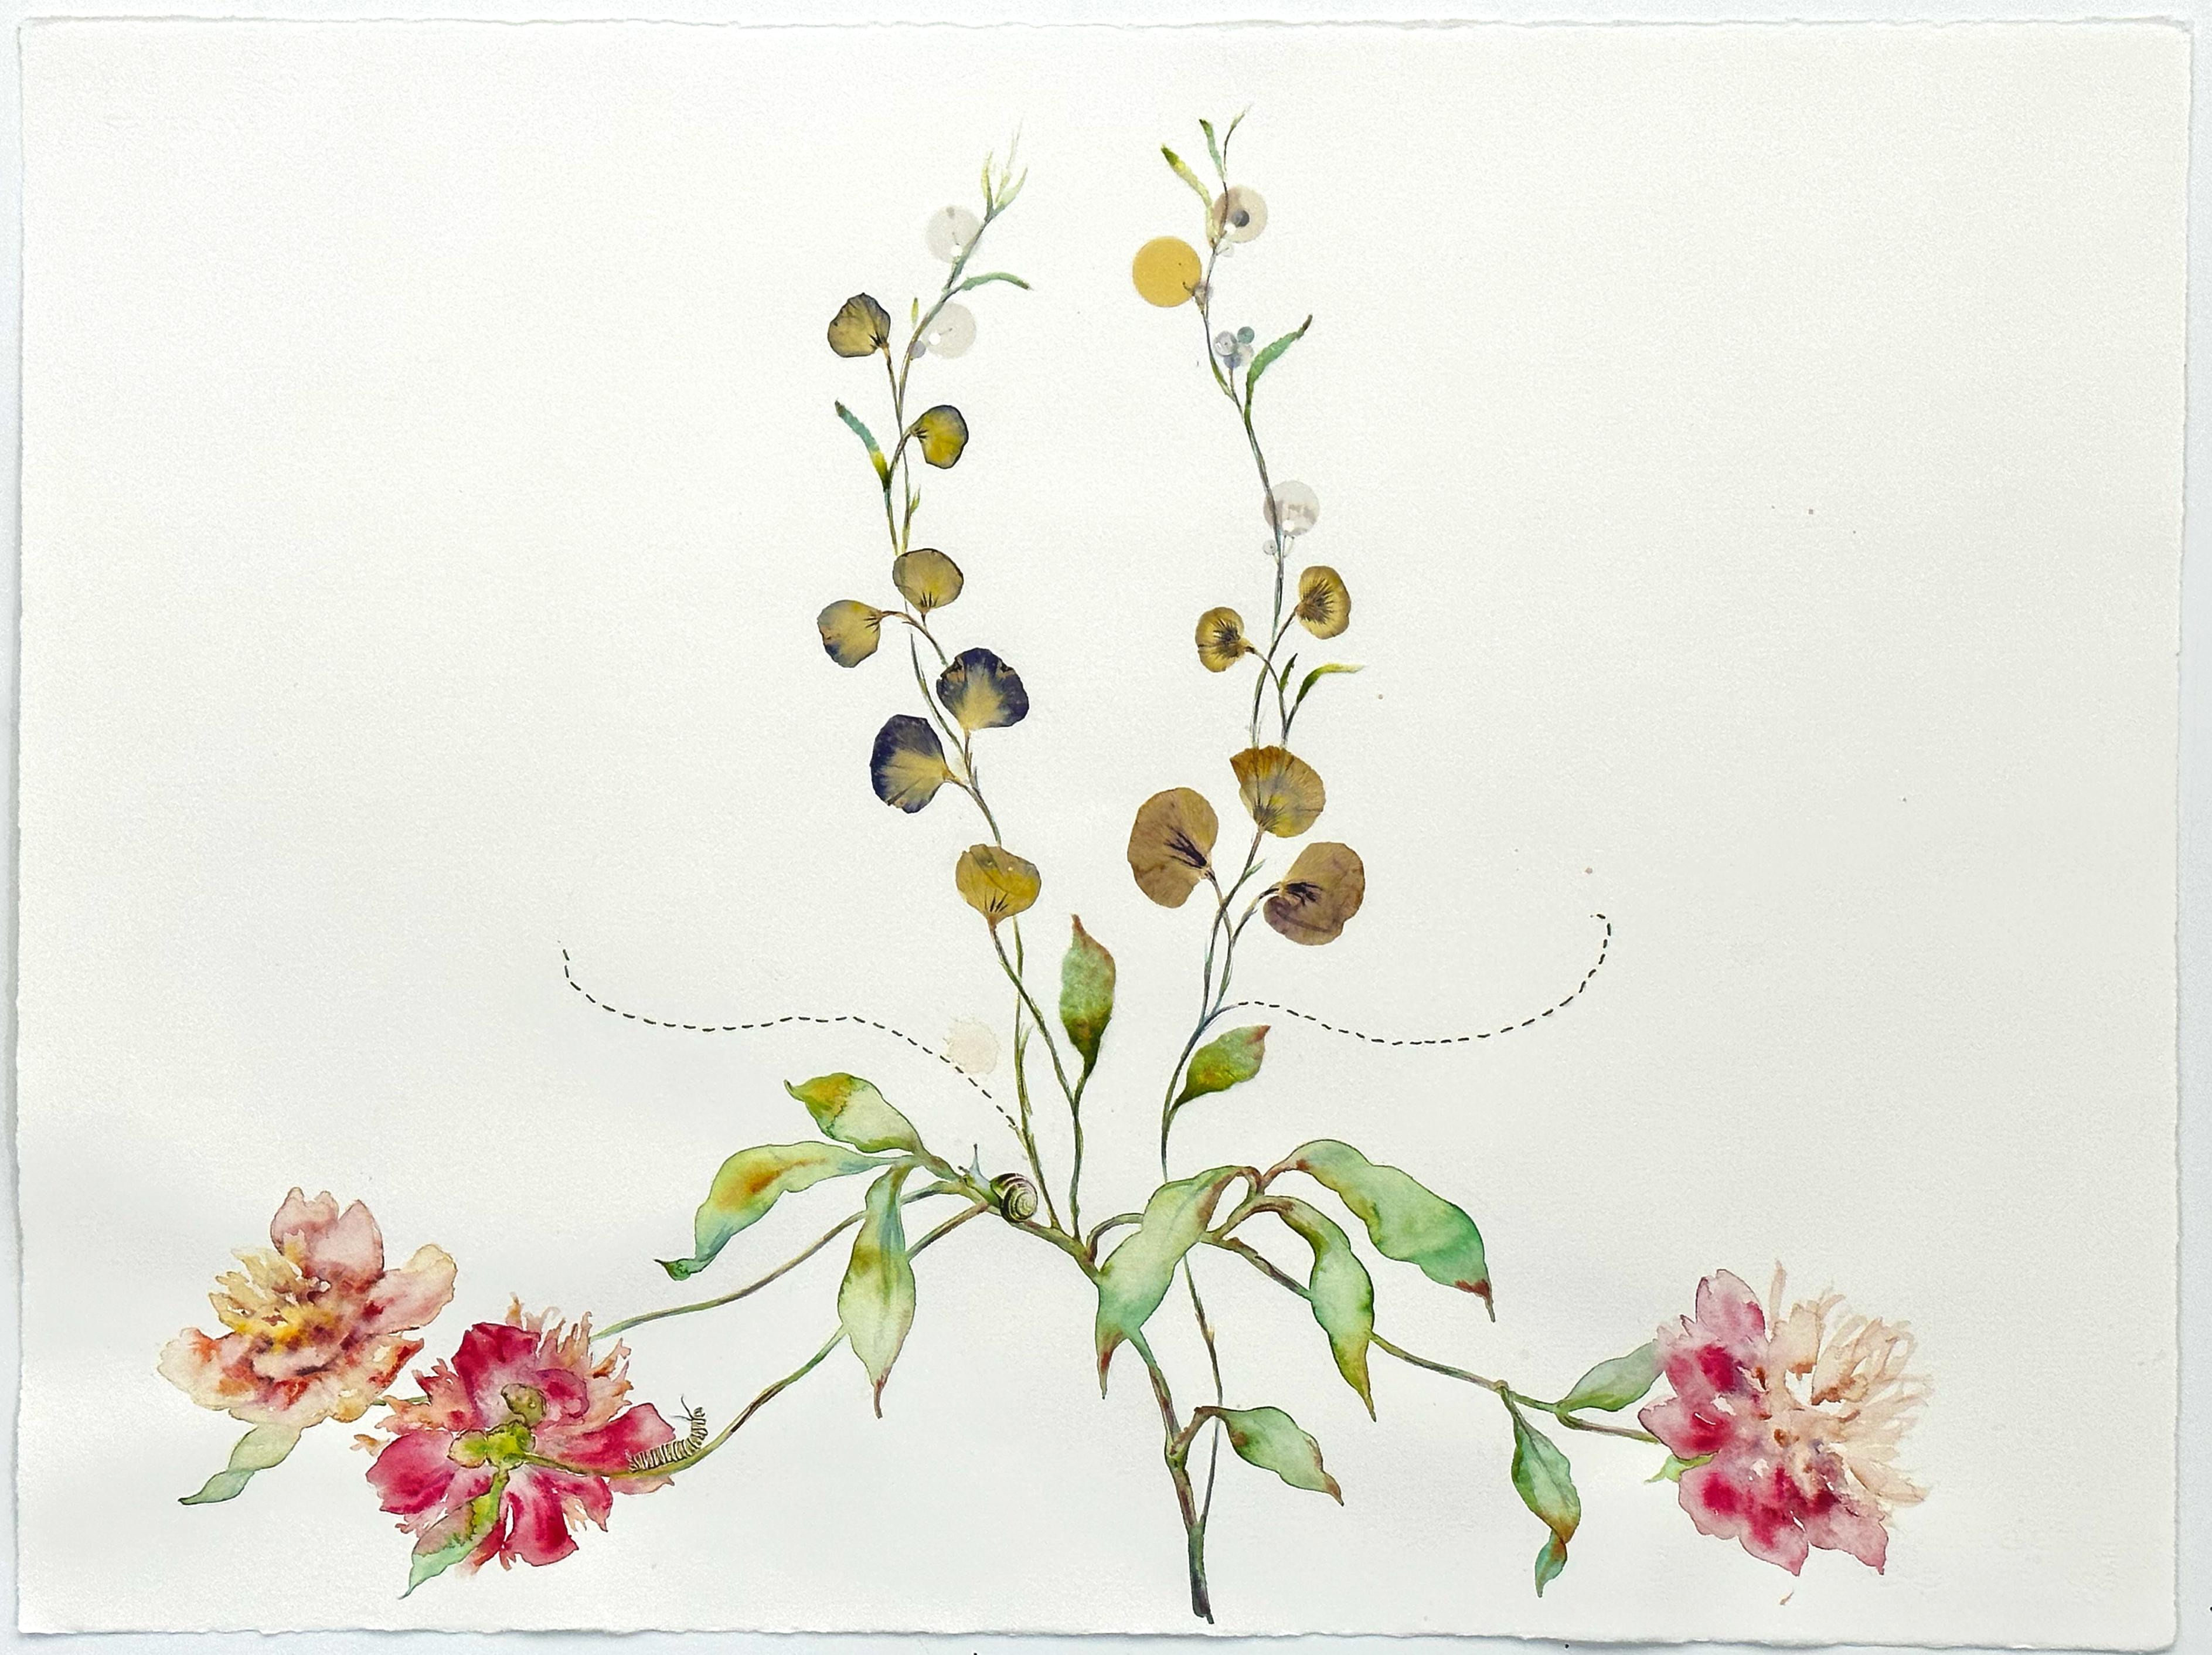 Marilla Palmer "A Delicate Droop" Mixed Media on Paper